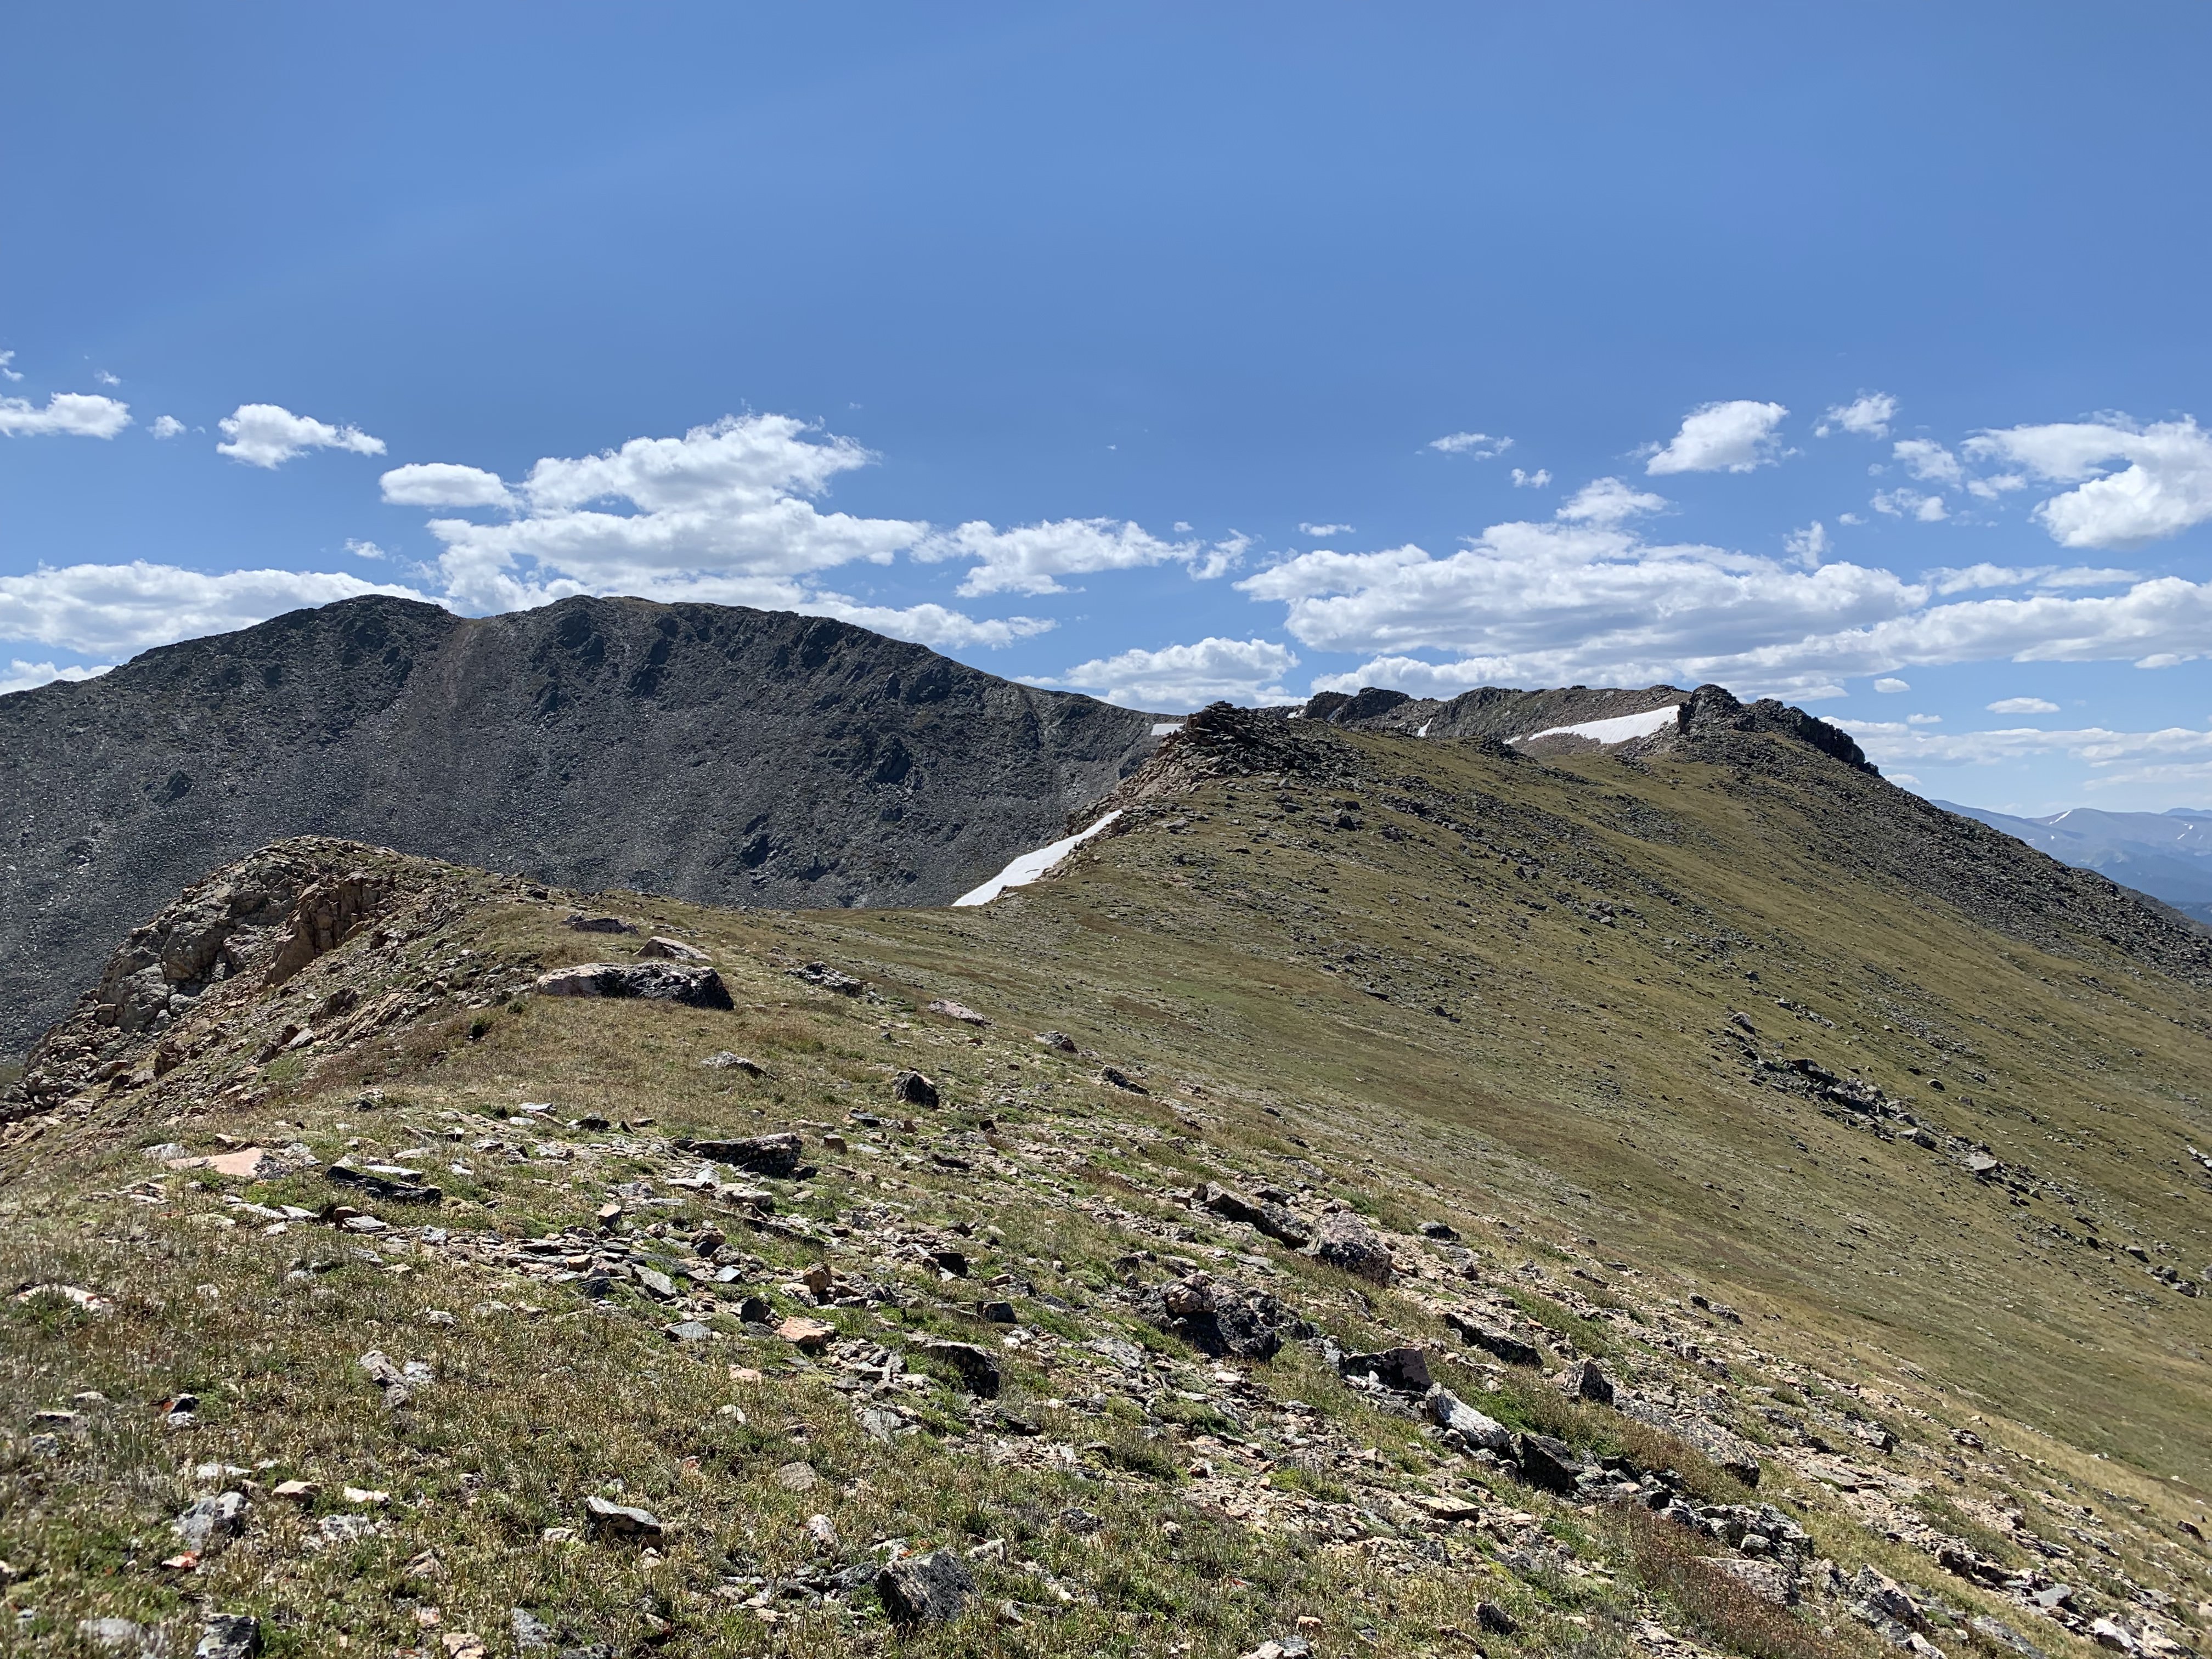 This is basically what you can expect from hiking on the Divide.